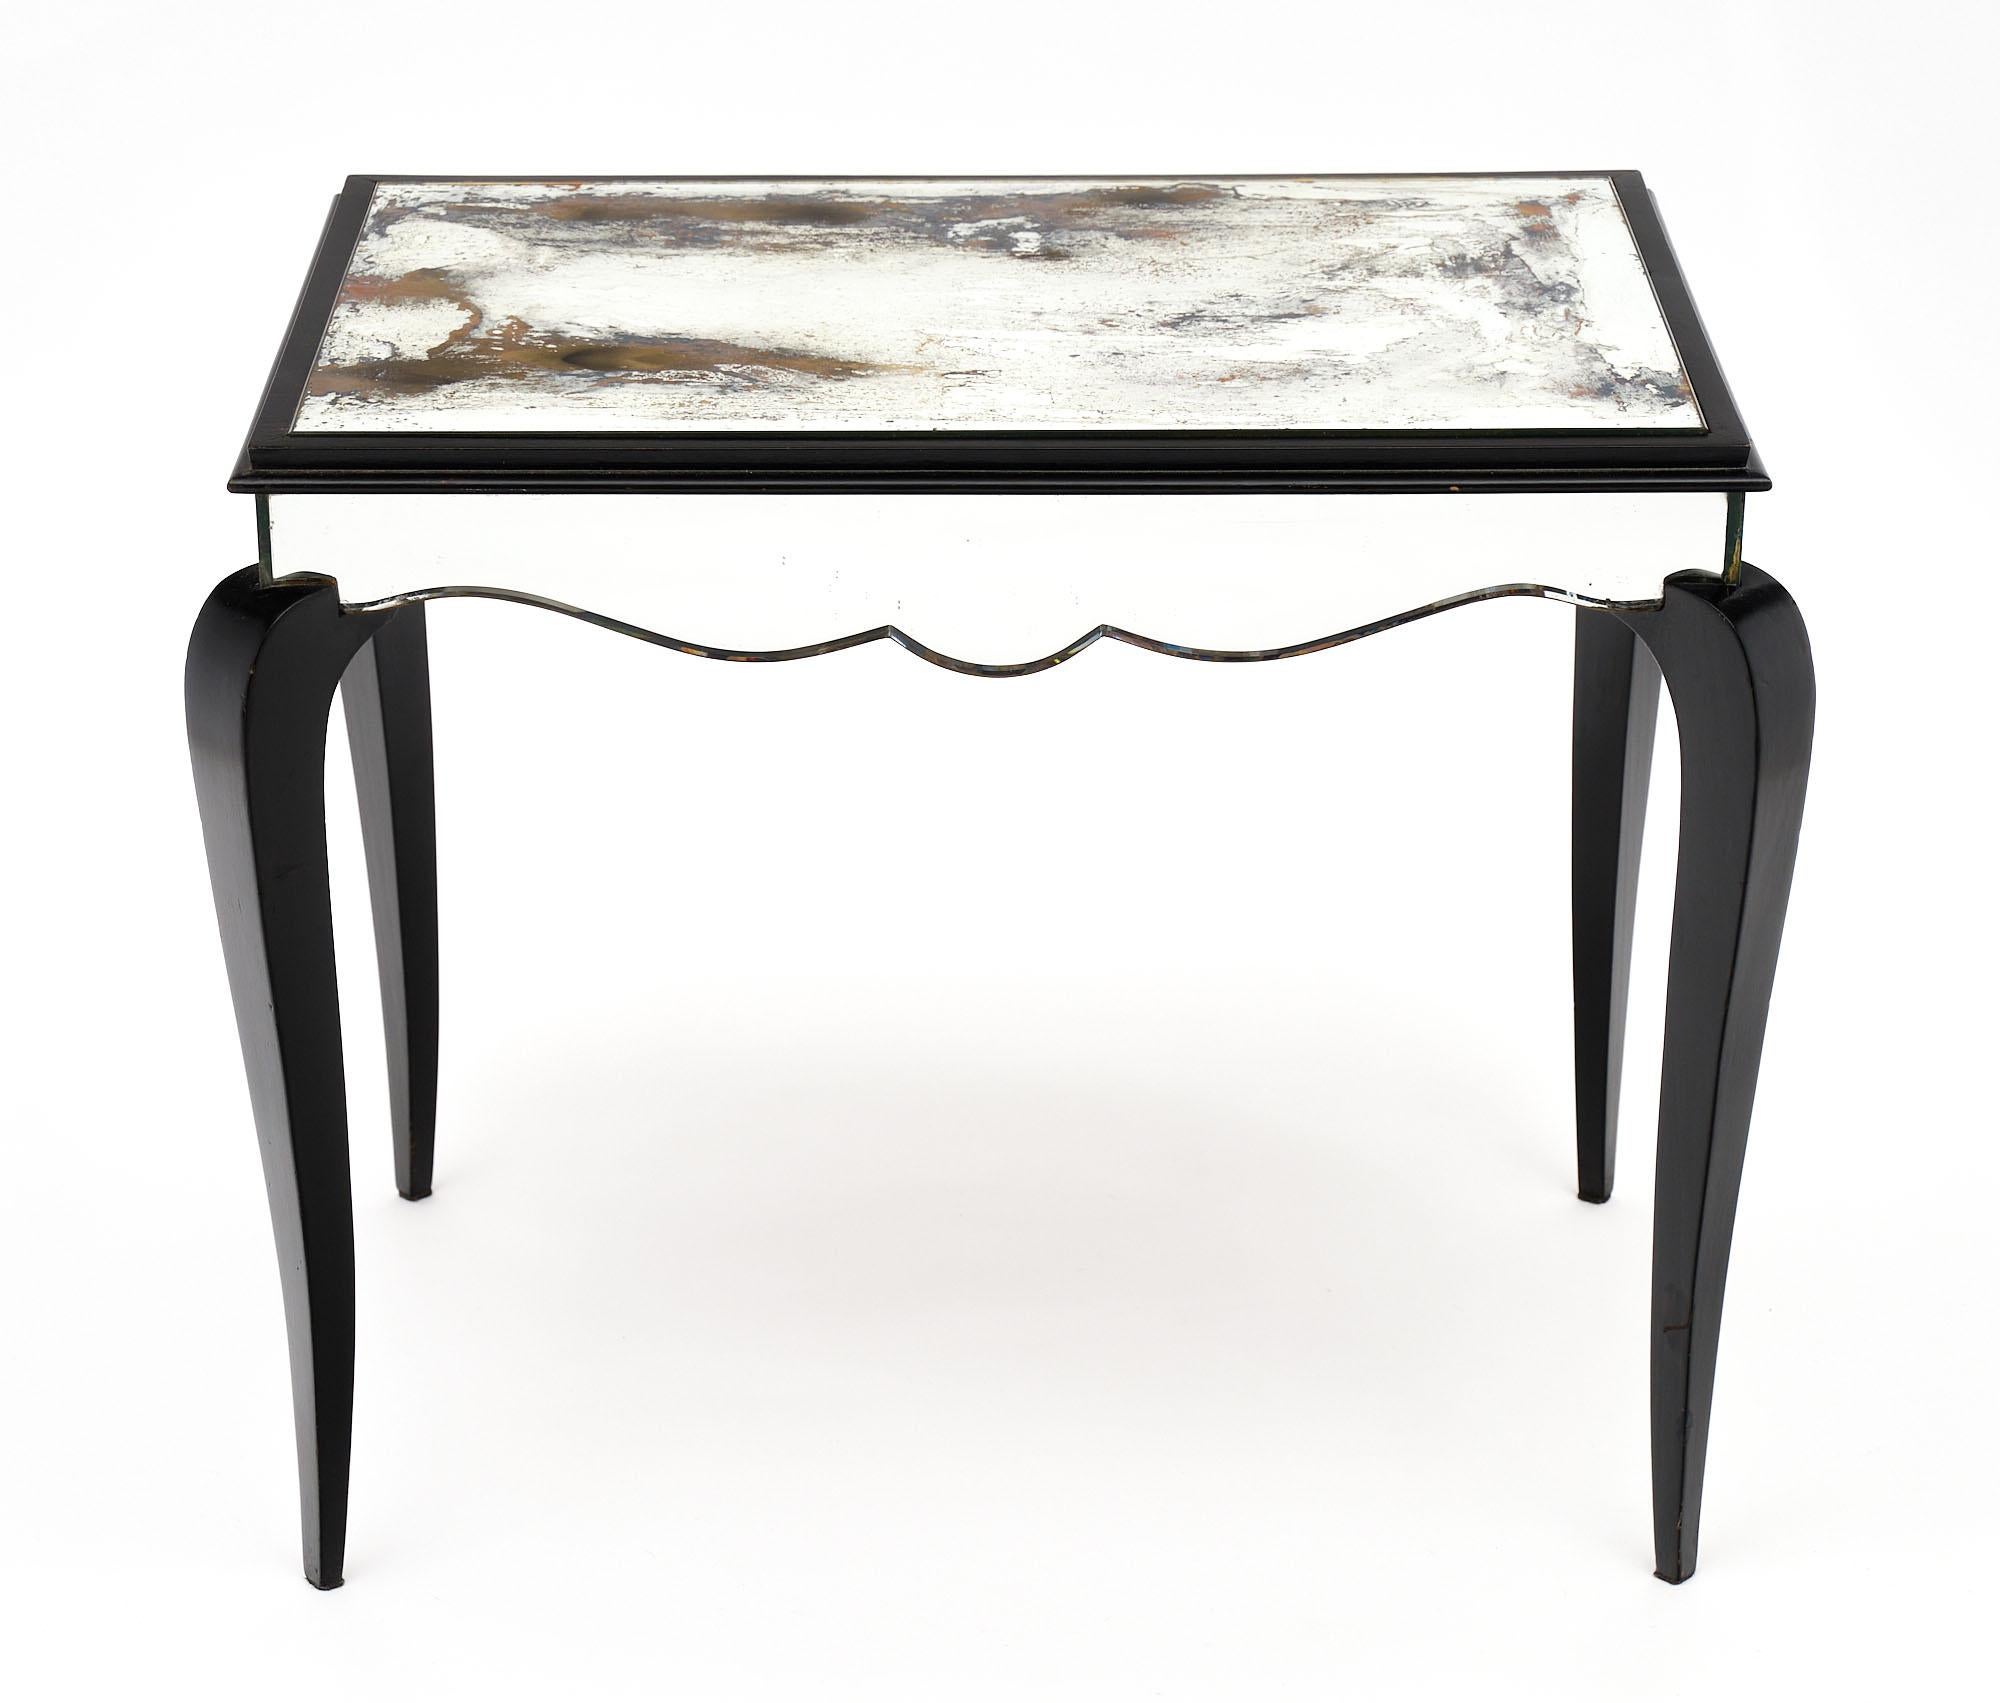 French Art Deco period coffee table, strongly attributed to Dominique. This piece has a beautiful heavily antiqued mirrored glass top. The apron features scalloped edges and is also mirrored. The curved legs are finished with an ebonized museum